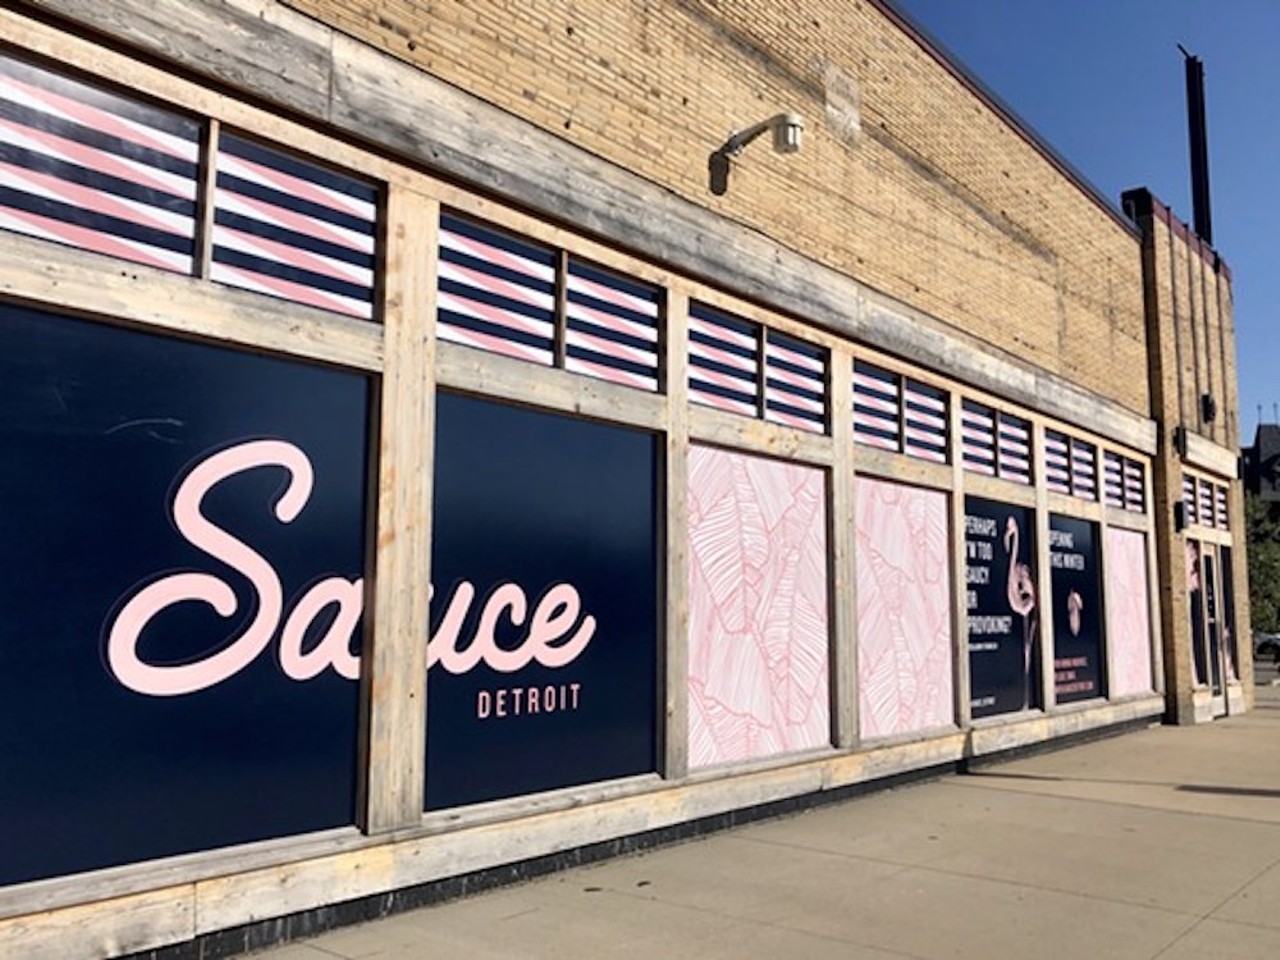 Sauce
4120 Second Ave., Detroit; saucedetroit.com
This Heirloom Hospitality (Townhouse, Prime + Proper) pizza spot was supposed to open in the spring, but was put on hold during the coronavirus pandemic. Sauce will open in the former Will Leather Goods  along Cass Corridor with former Otus Supply chef Myles McVay at the helm. Featuring Neapolitan pizzas and other dishes inspired by Italy and Southern California, Sauce will also include a coffee bar that will serve lattes and gelato. It&#146;s expected to seat 300 people, including patio seating. 
Photo by Steve Neavling